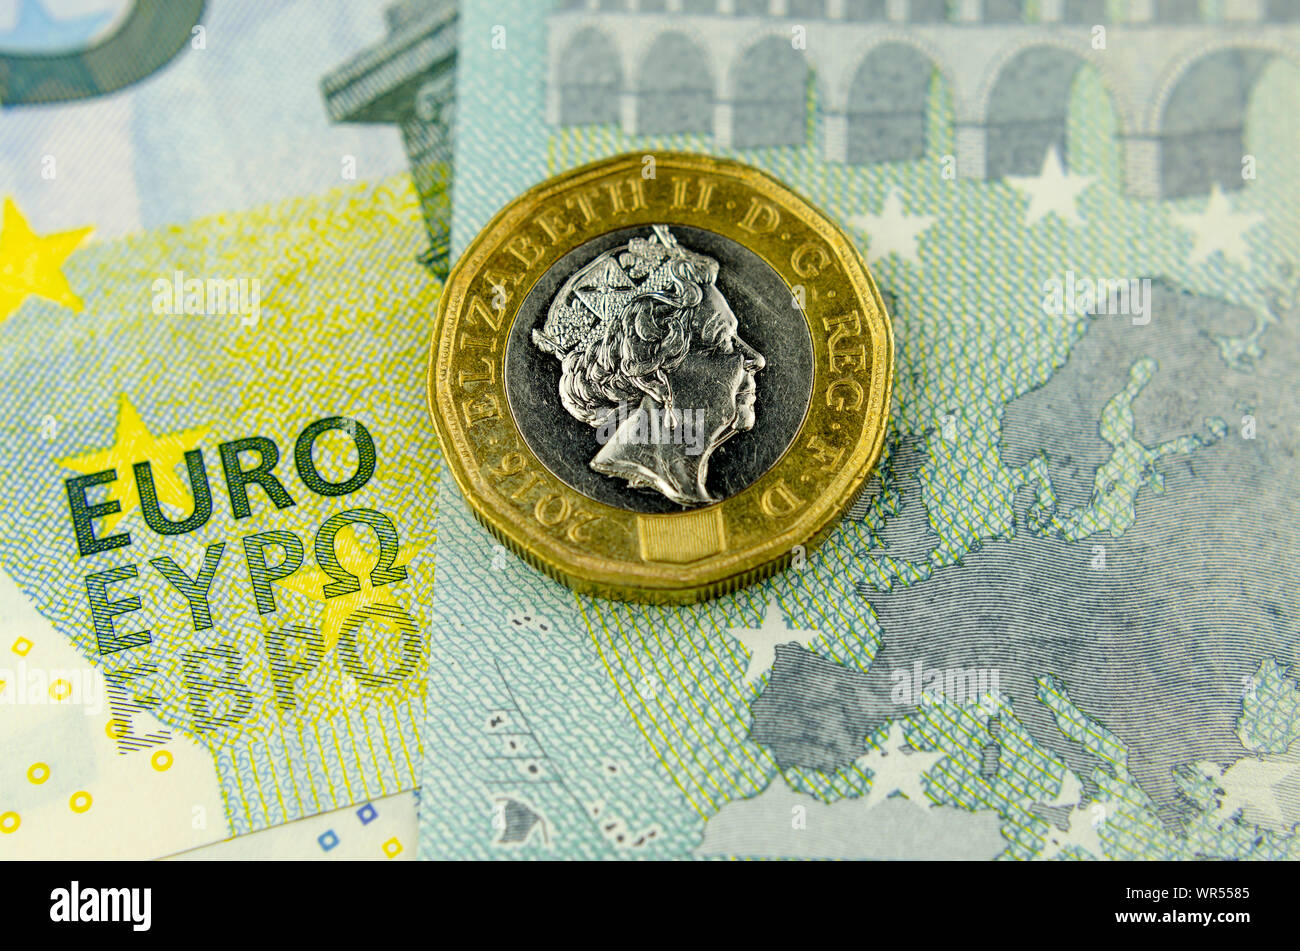 One pound coin on top of 5 Euros banknote, next to the map of the EU and words EURO. Flat lay view. Concept for currency exchange, finance or UK - EU Stock Photo